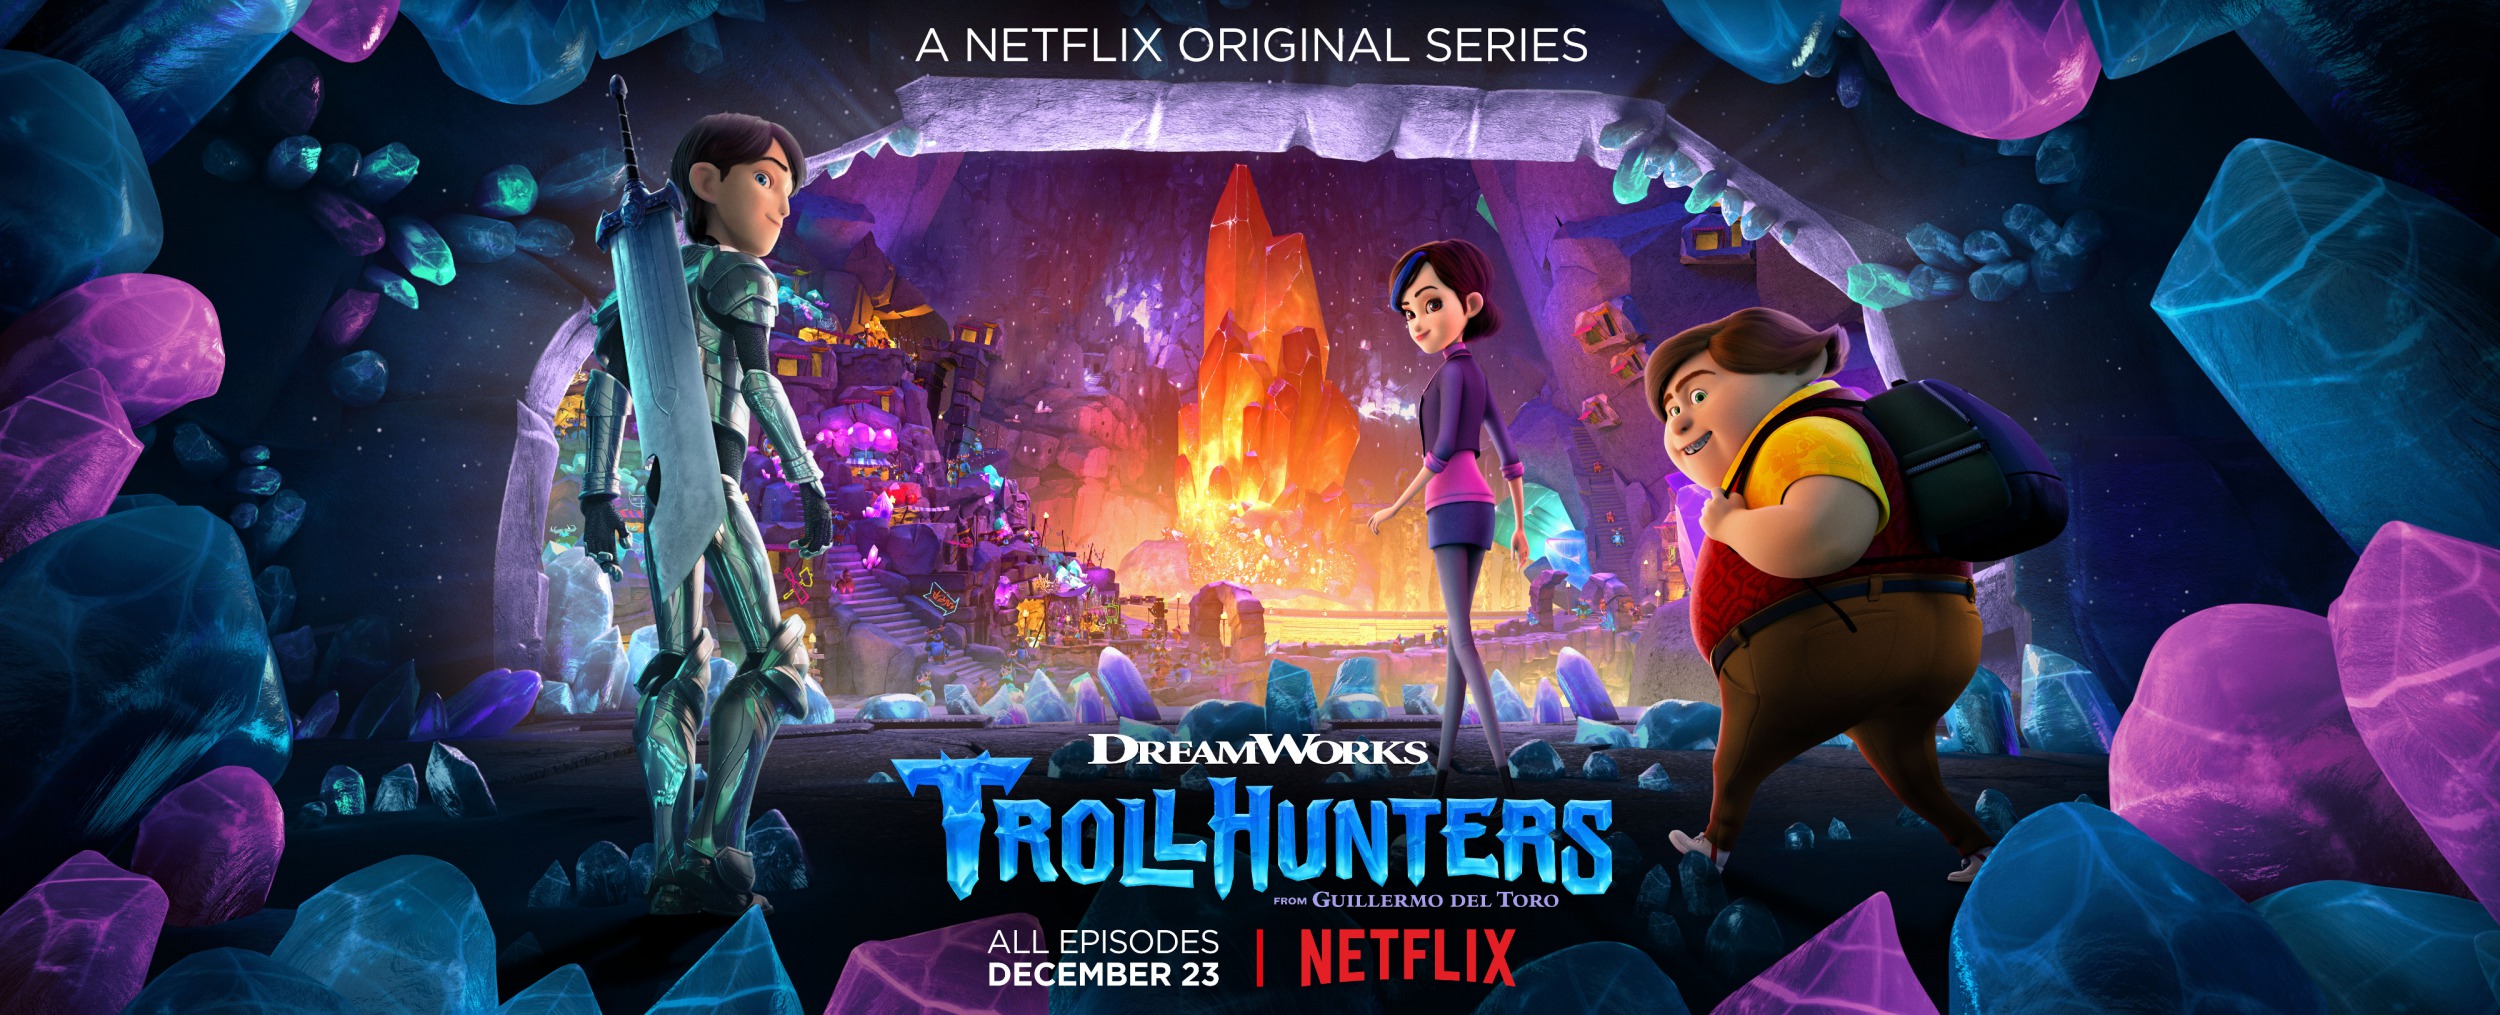 Mega Sized Movie Poster Image for Trollhunters (#15 of 20)